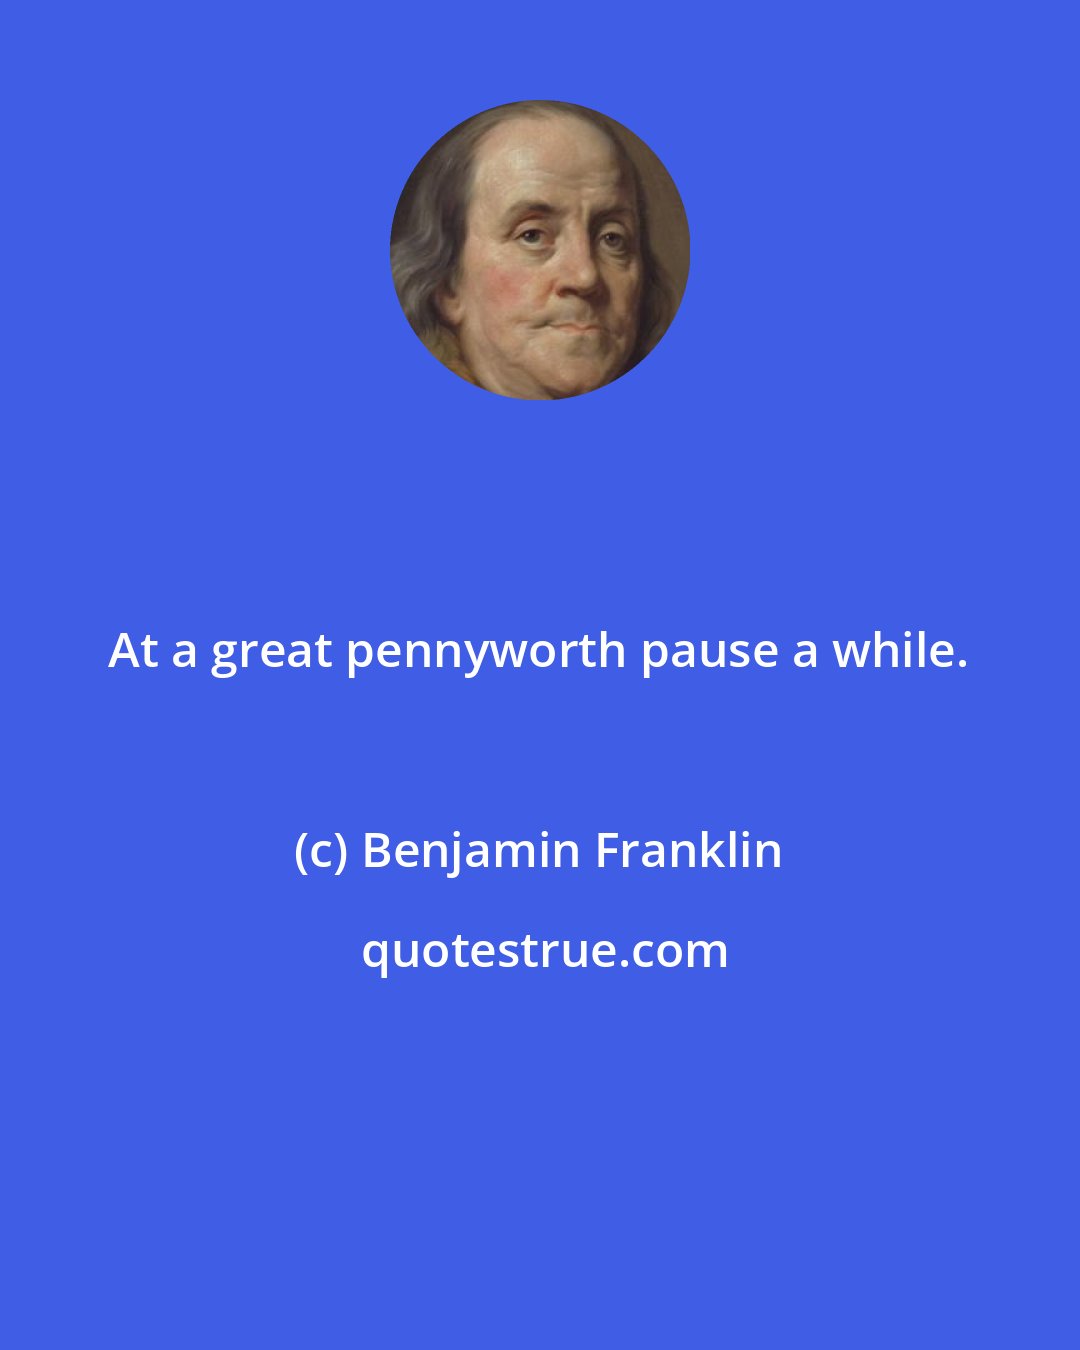 Benjamin Franklin: At a great pennyworth pause a while.